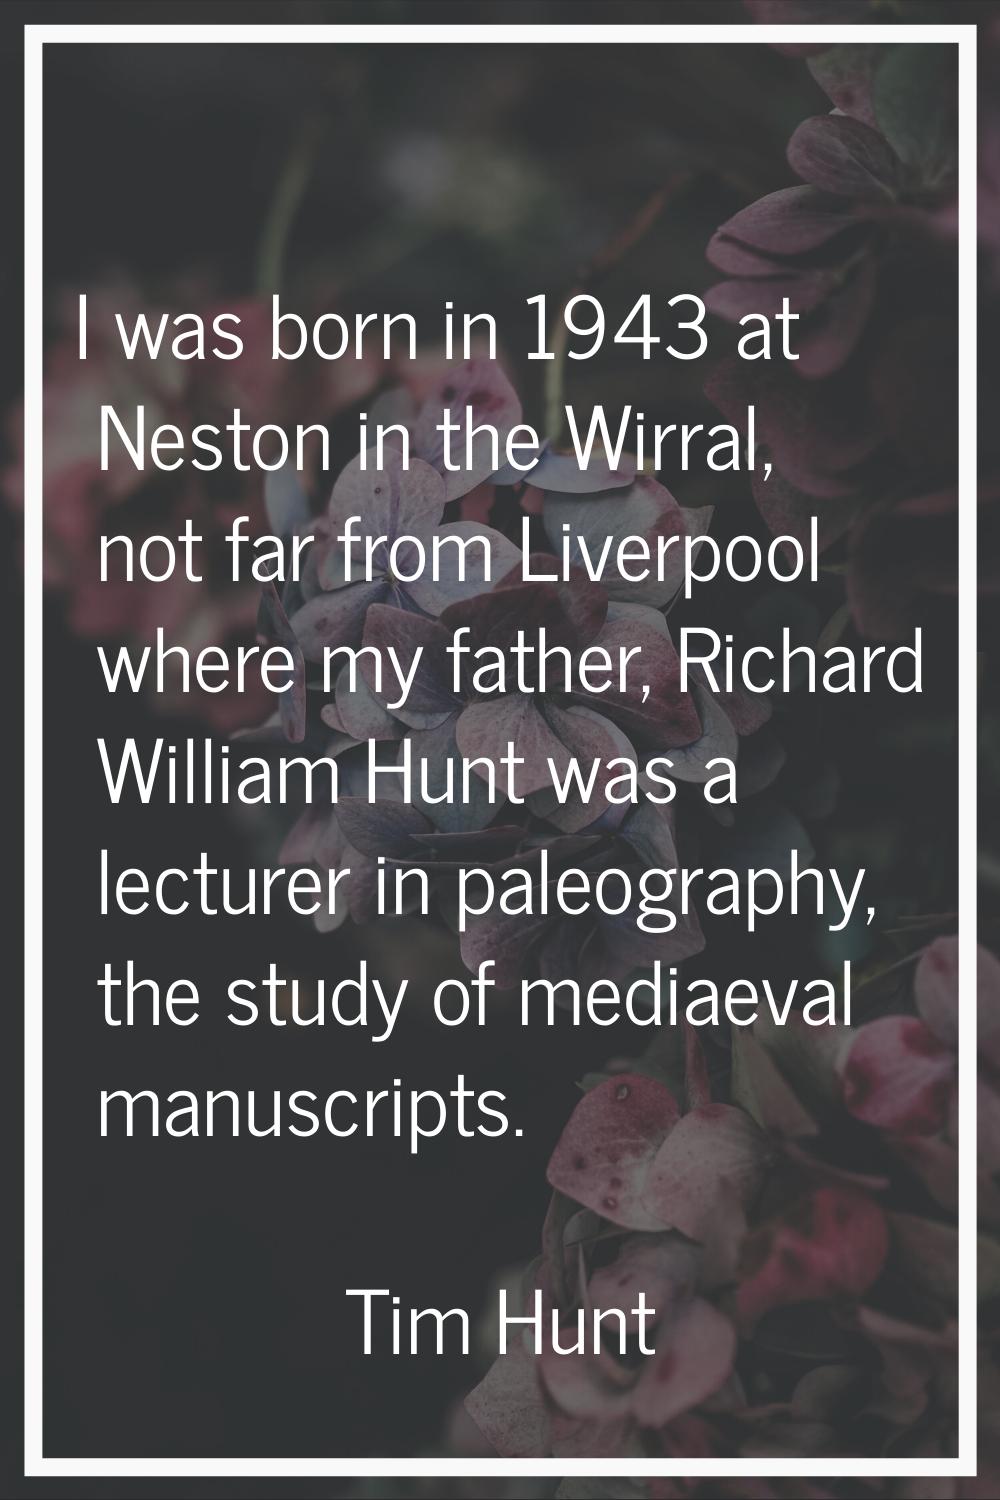 I was born in 1943 at Neston in the Wirral, not far from Liverpool where my father, Richard William